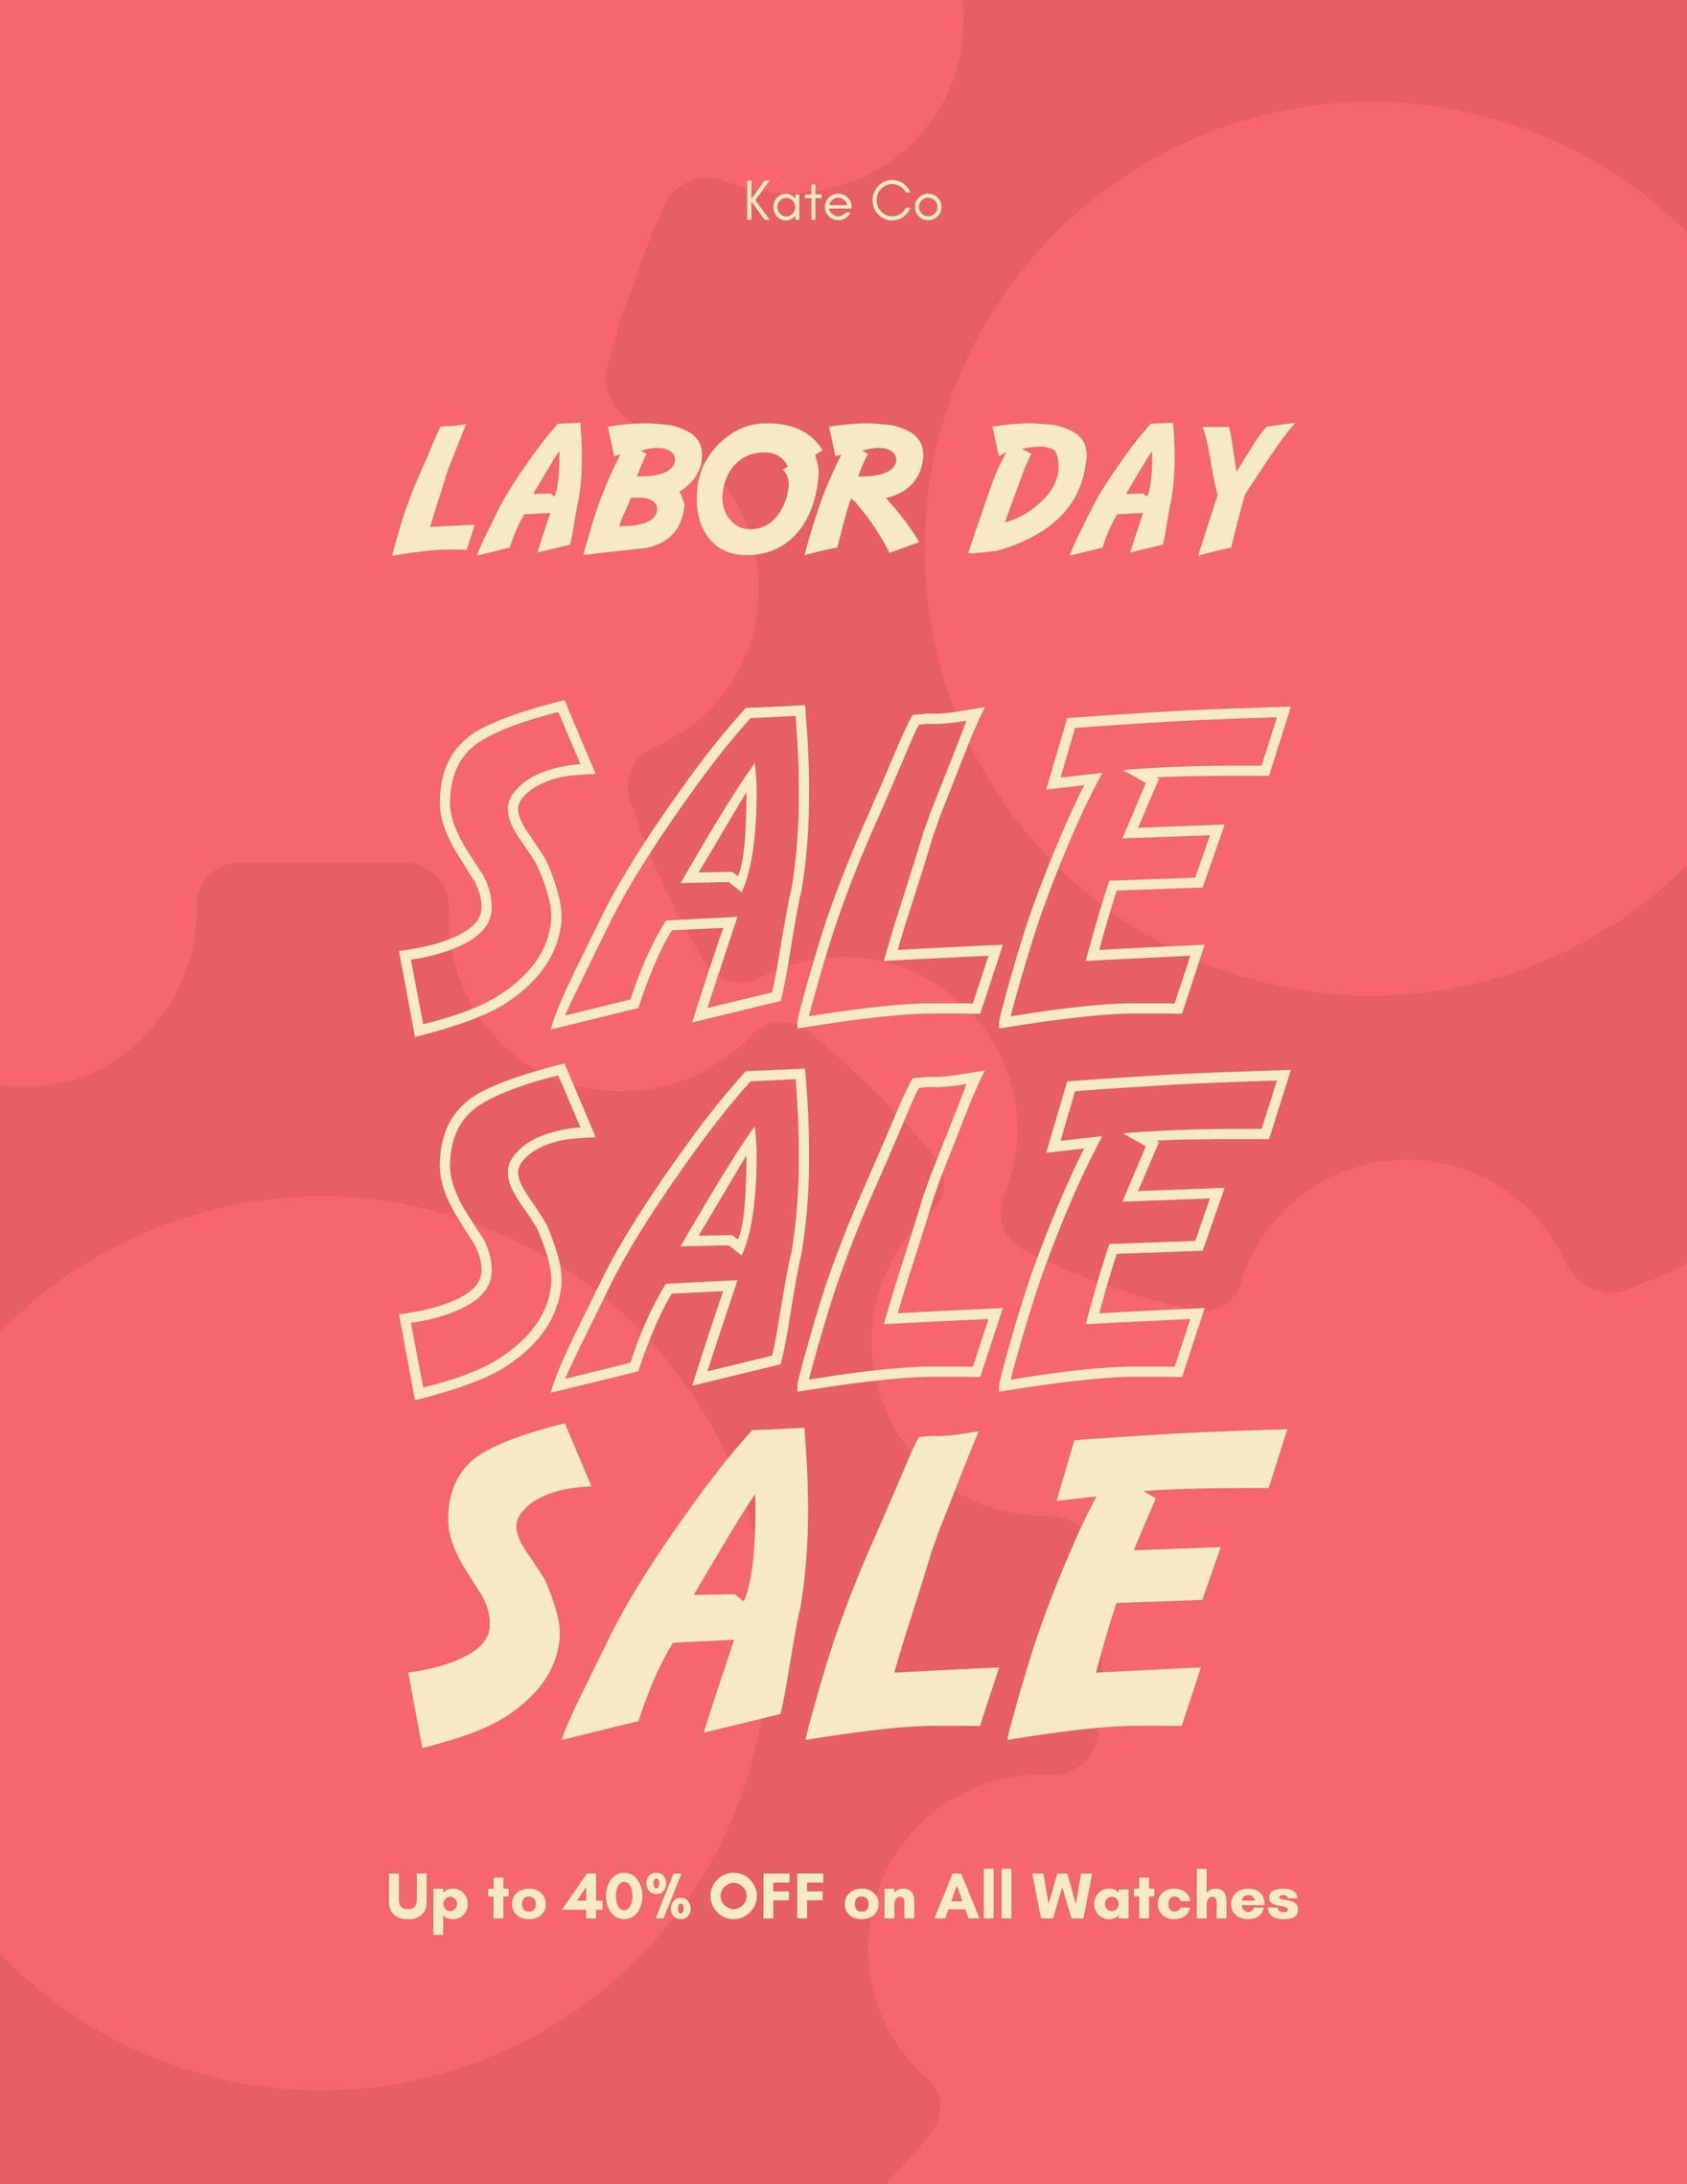 Free Modern Labor Day Flyer Template in Word, Google Docs, Illustrator, PSD, Apple Pages, EPS, SVG, JPG, PNG